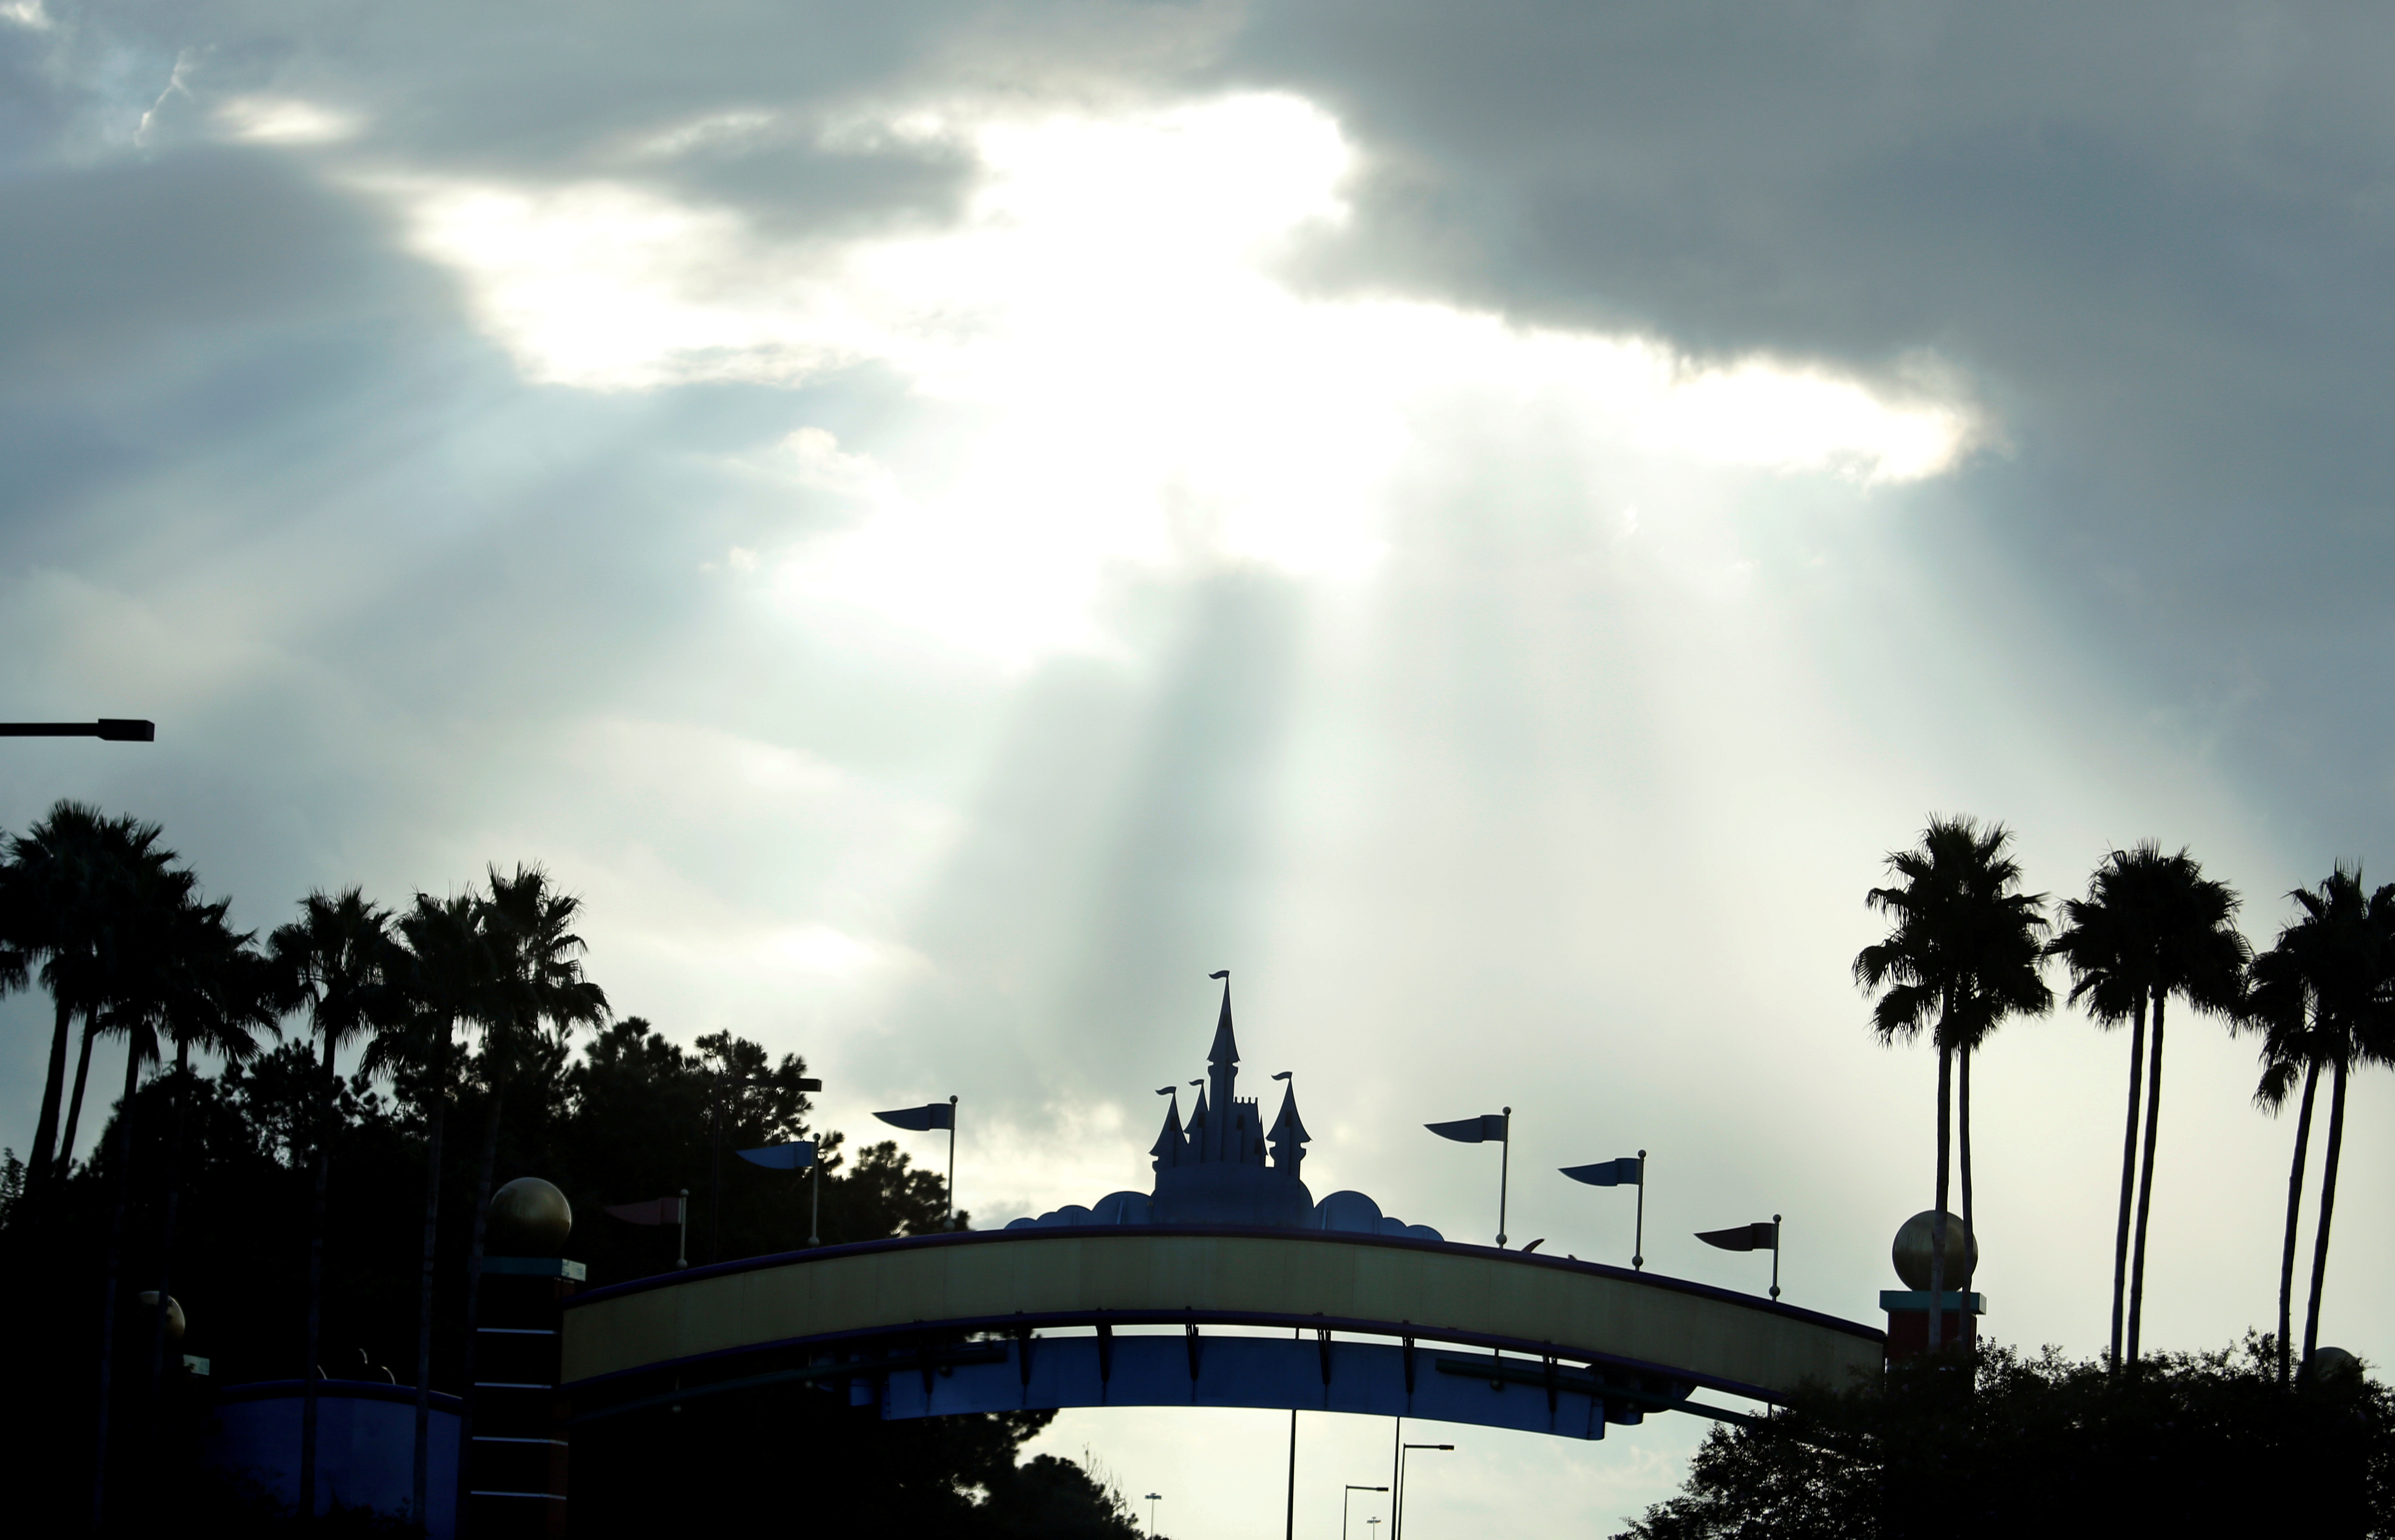 Sunlight breaks through clouds near Disney World ahead of the arrival of Hurricane Irma, in Kissimmee